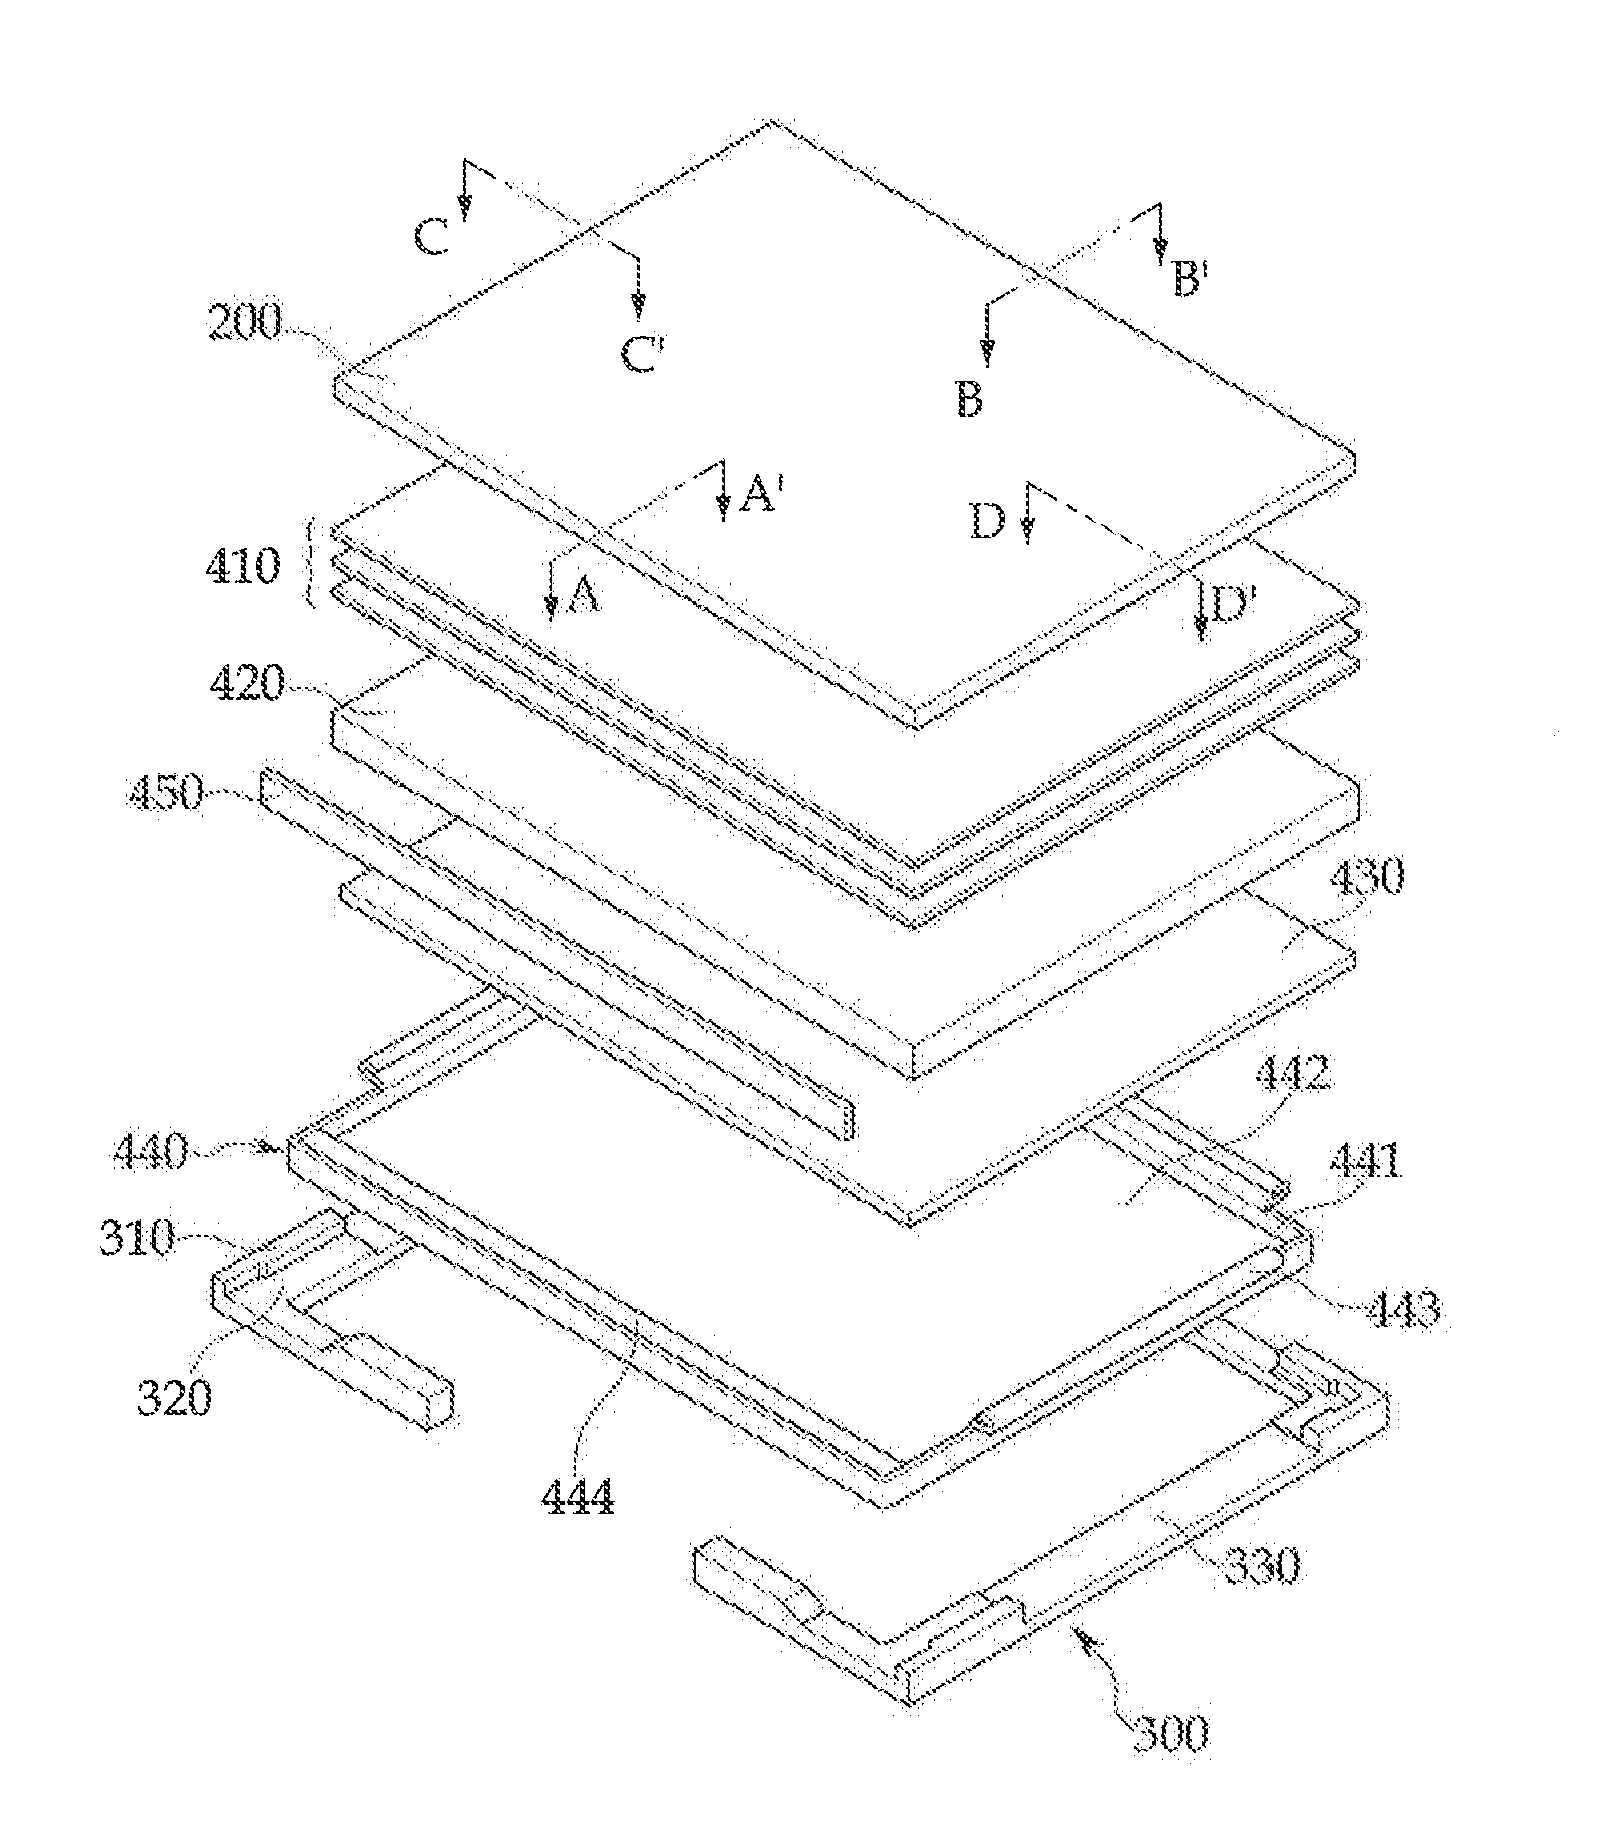 Display device having a bottom chassis including a binding portion